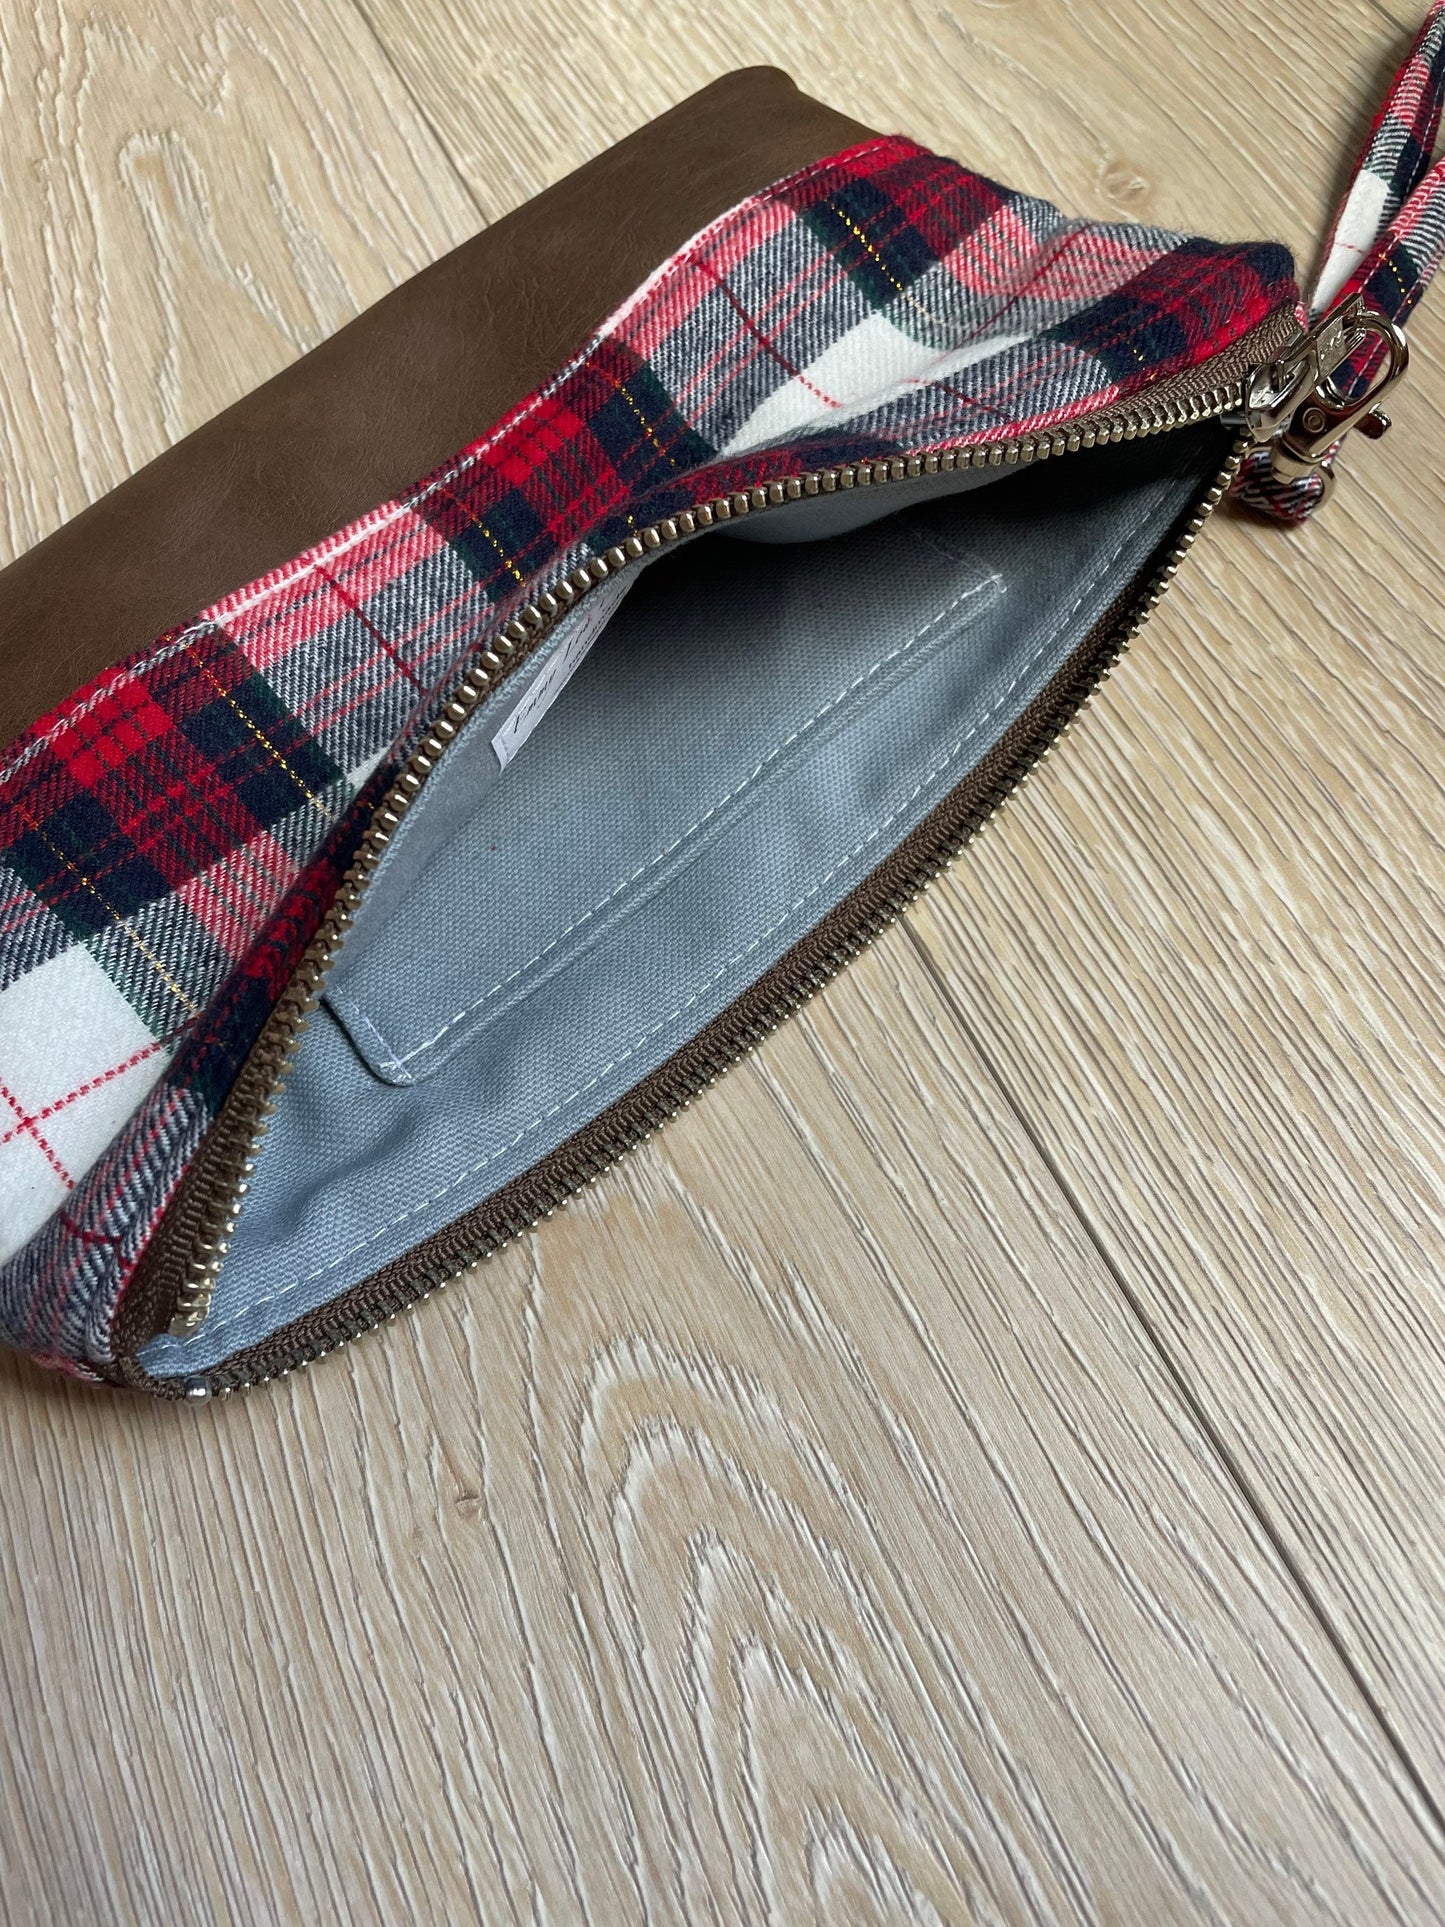 Red and Black Plaid Flannel Wristlet